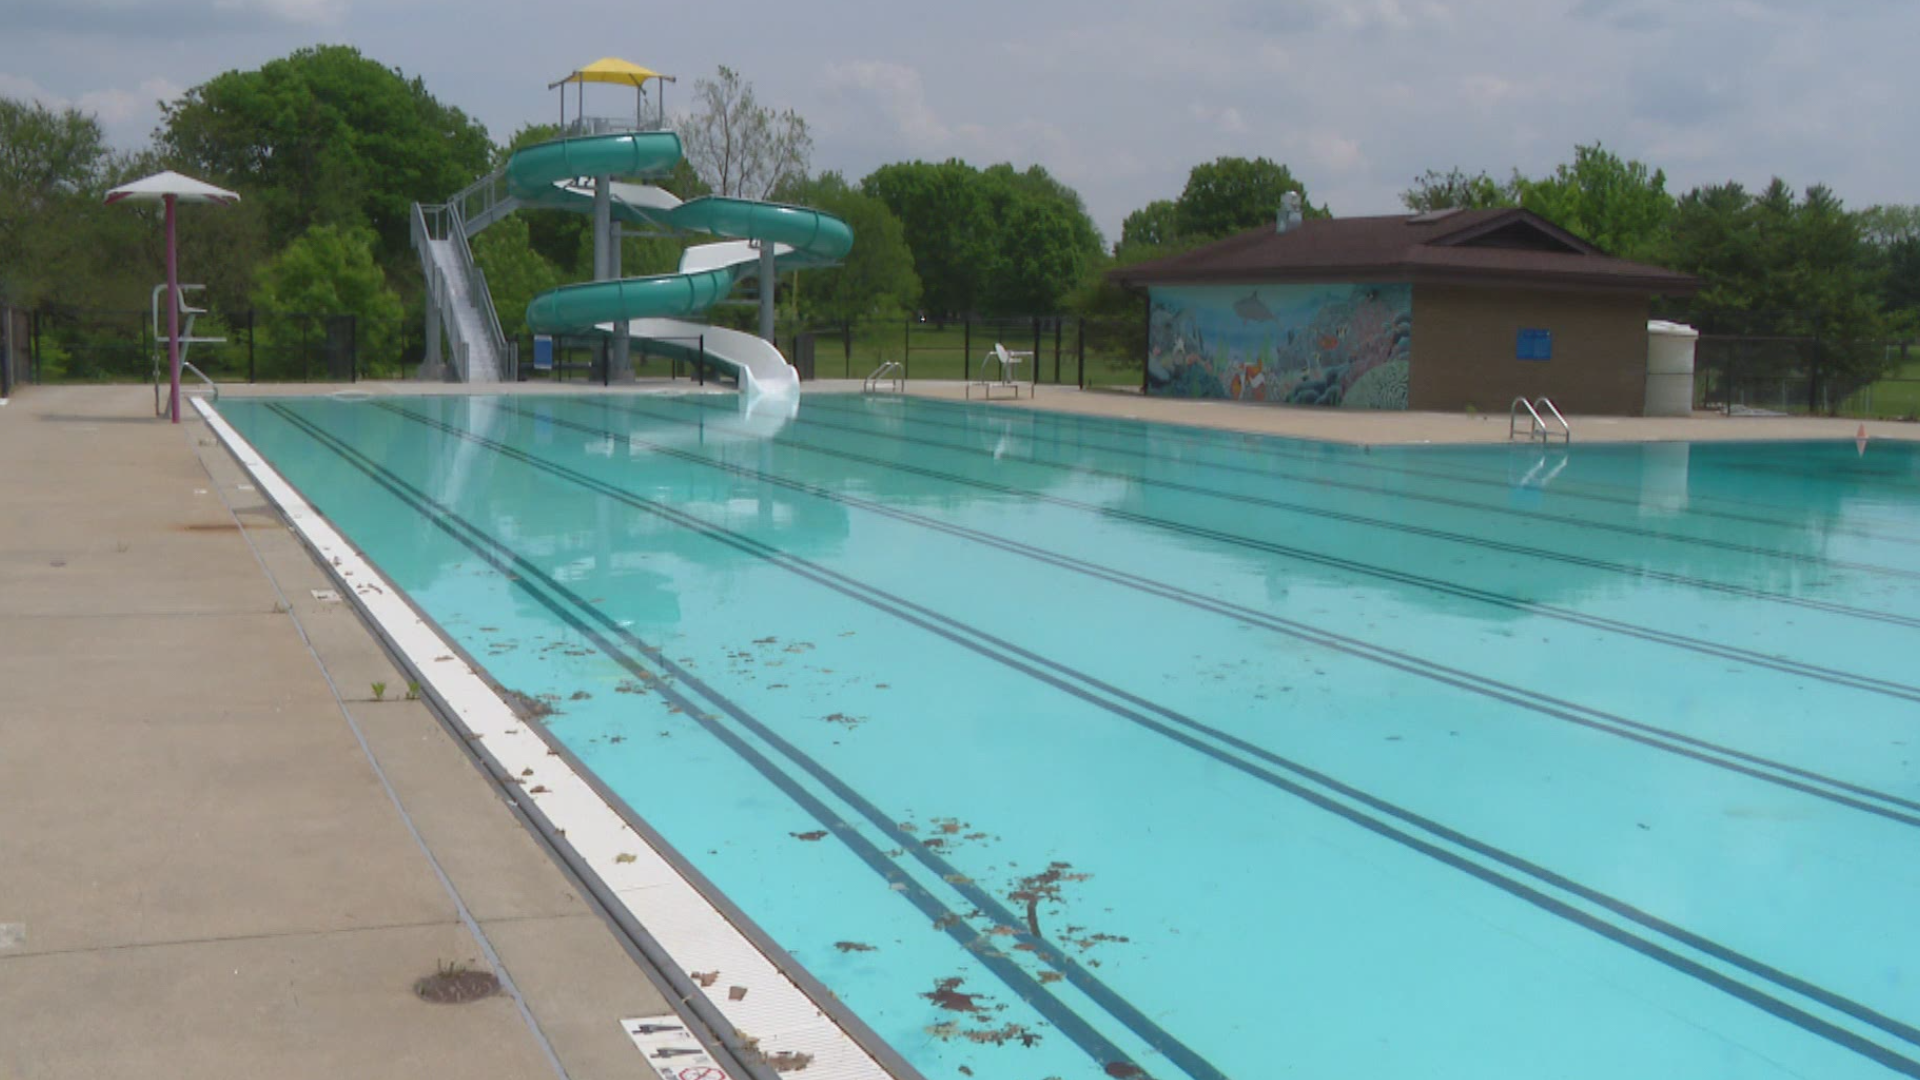 Indy Parks and other swimming pools in central Indiana need help to keep those pools operating.